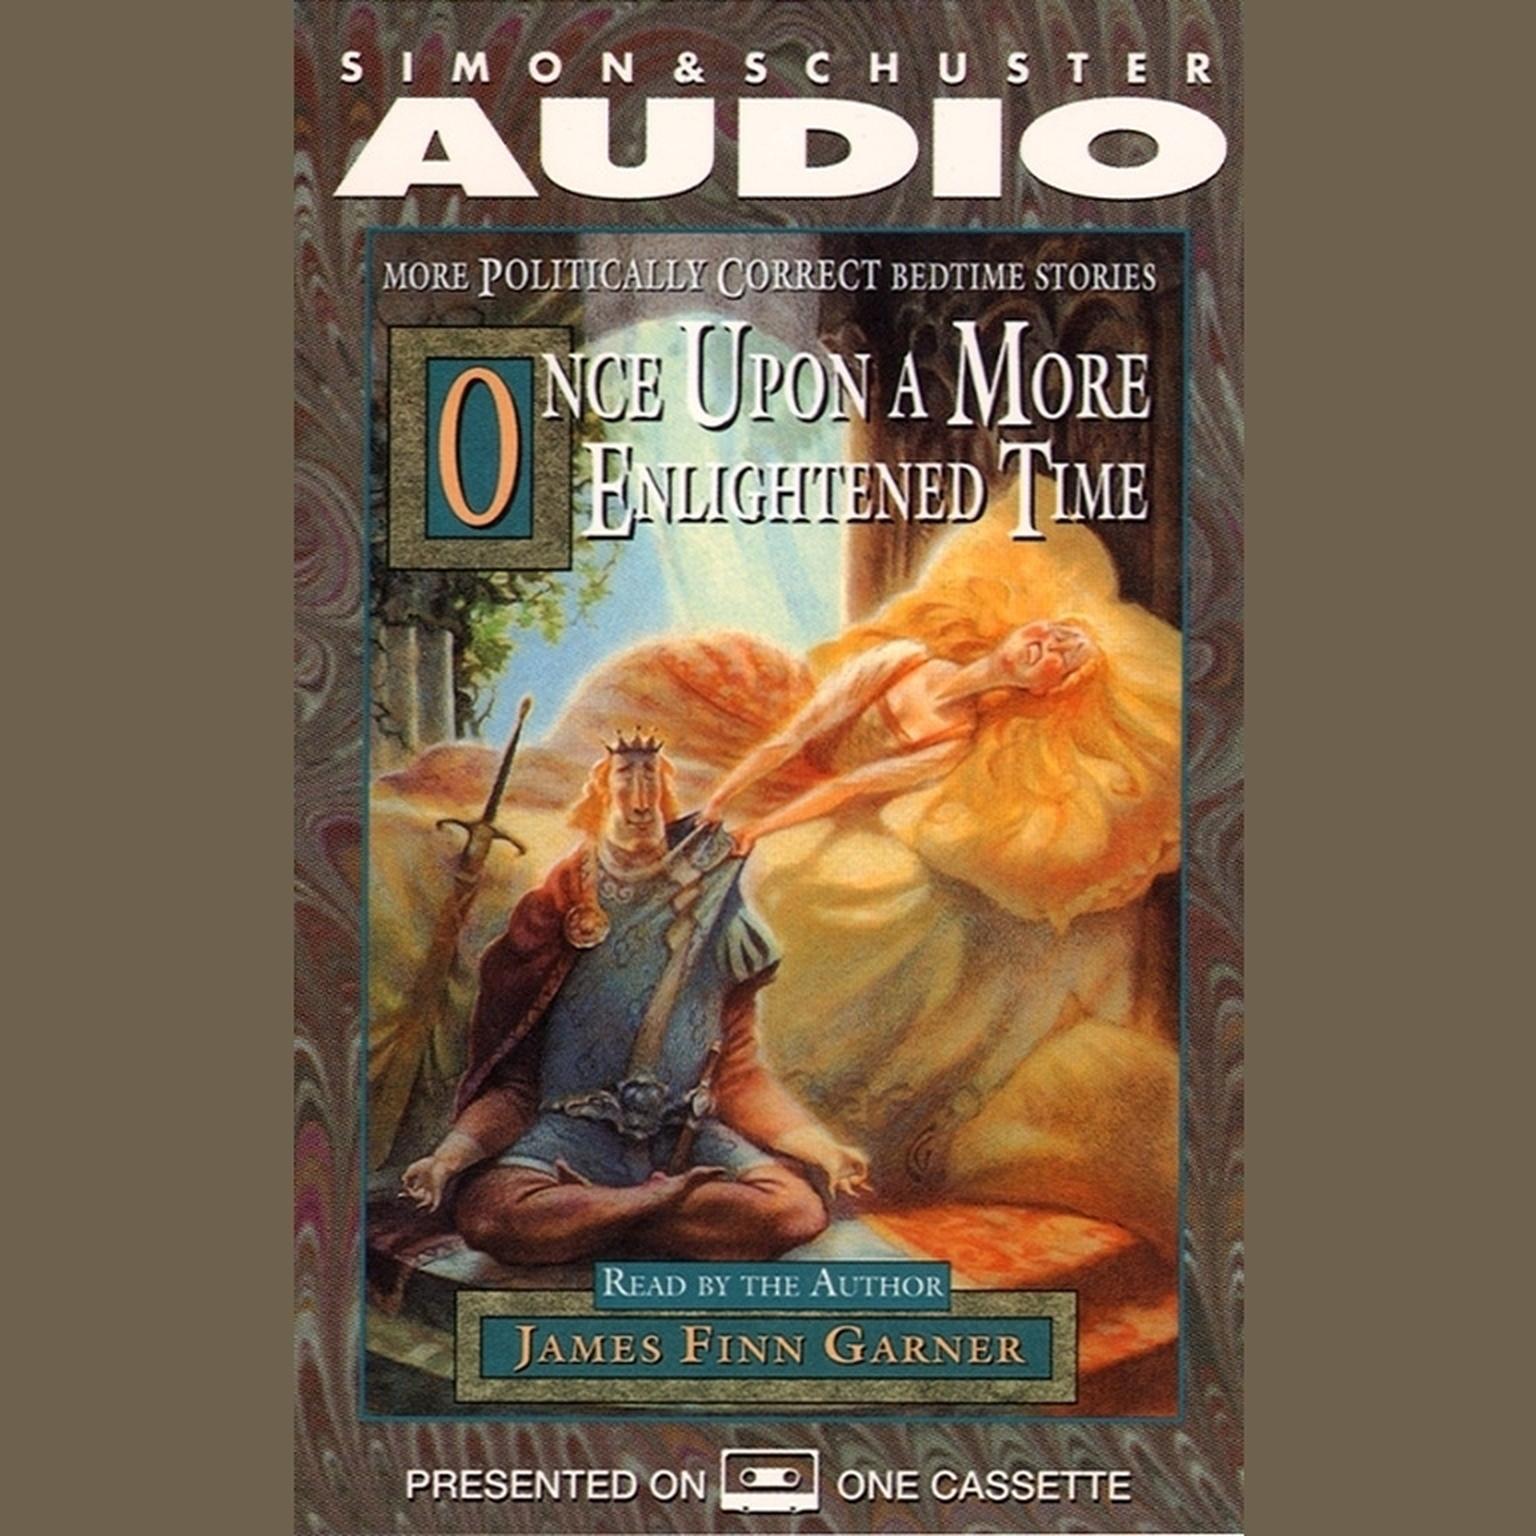 Once upon a More Enlightened Time (Abridged): More Politically Correct Bedtime Stories Audiobook, by James Finn Garner